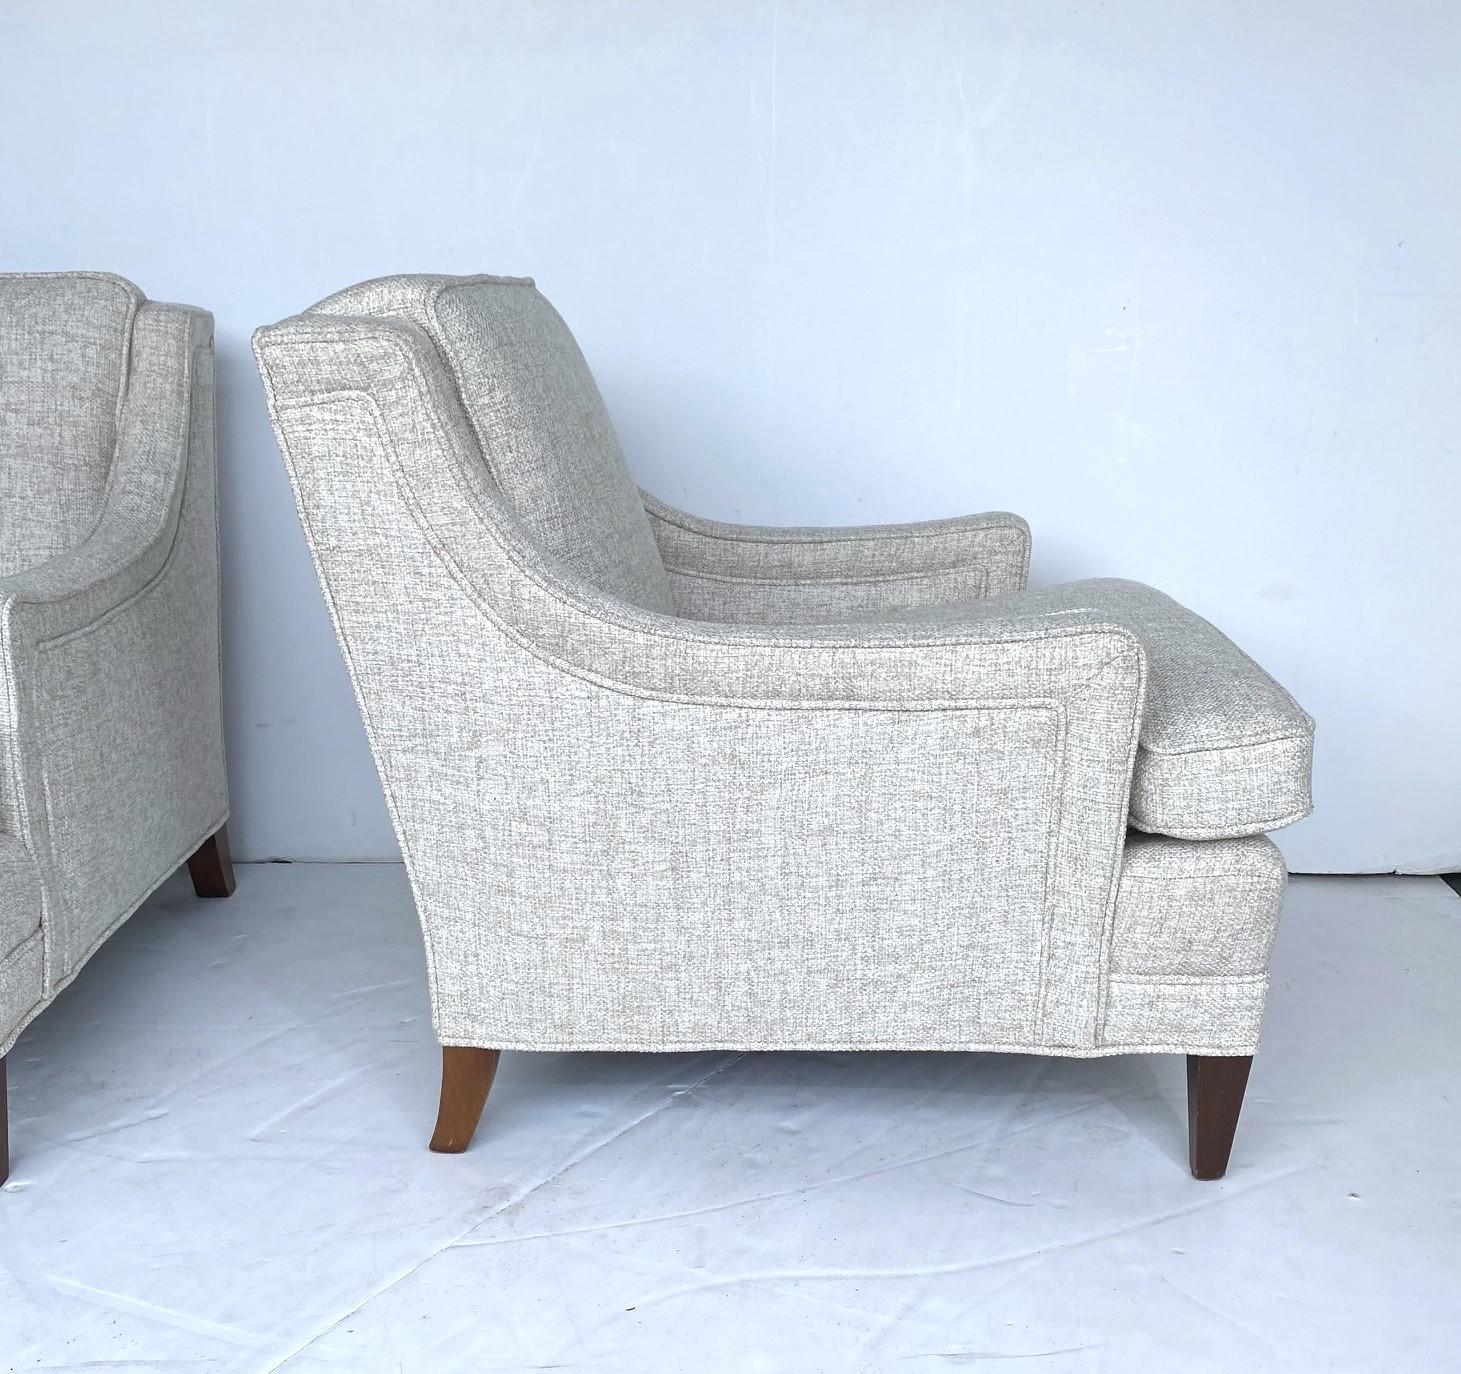 A pair of mid-century club chairs by Kittinger. New upholstery.